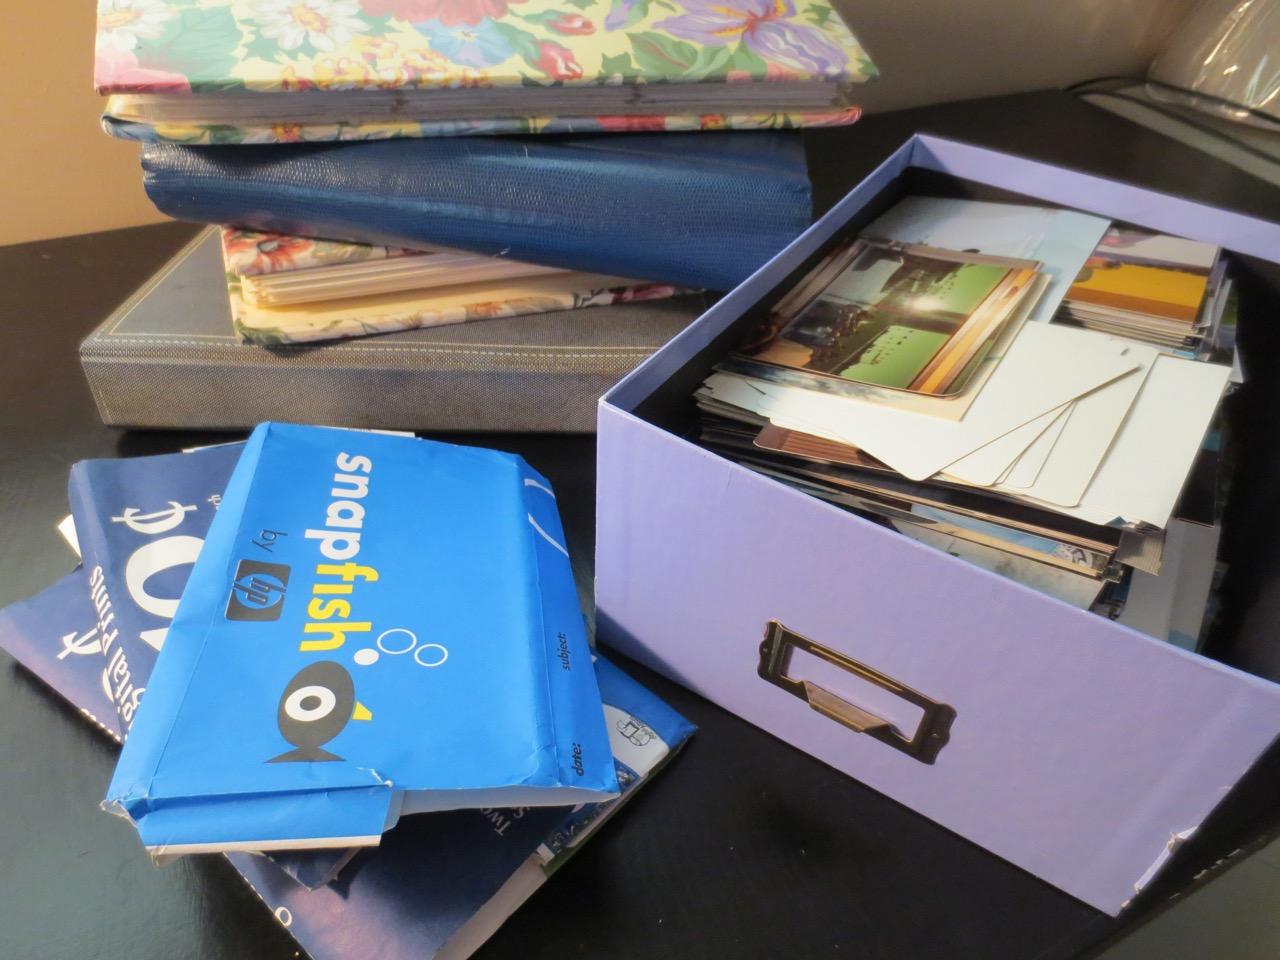 How to Organize Printed Photographs